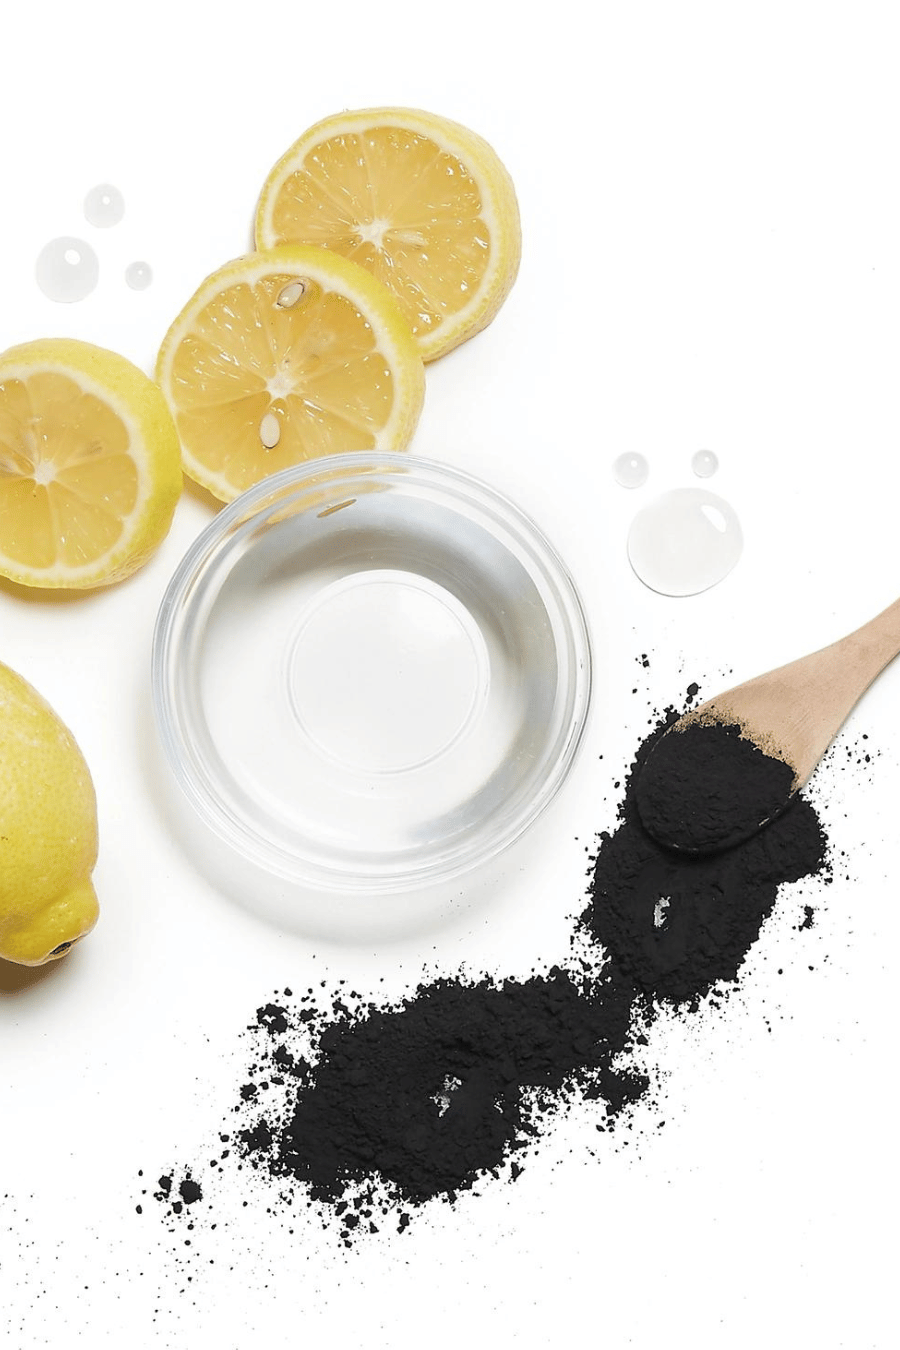 lemons, water, charcoal with a wooden spoon